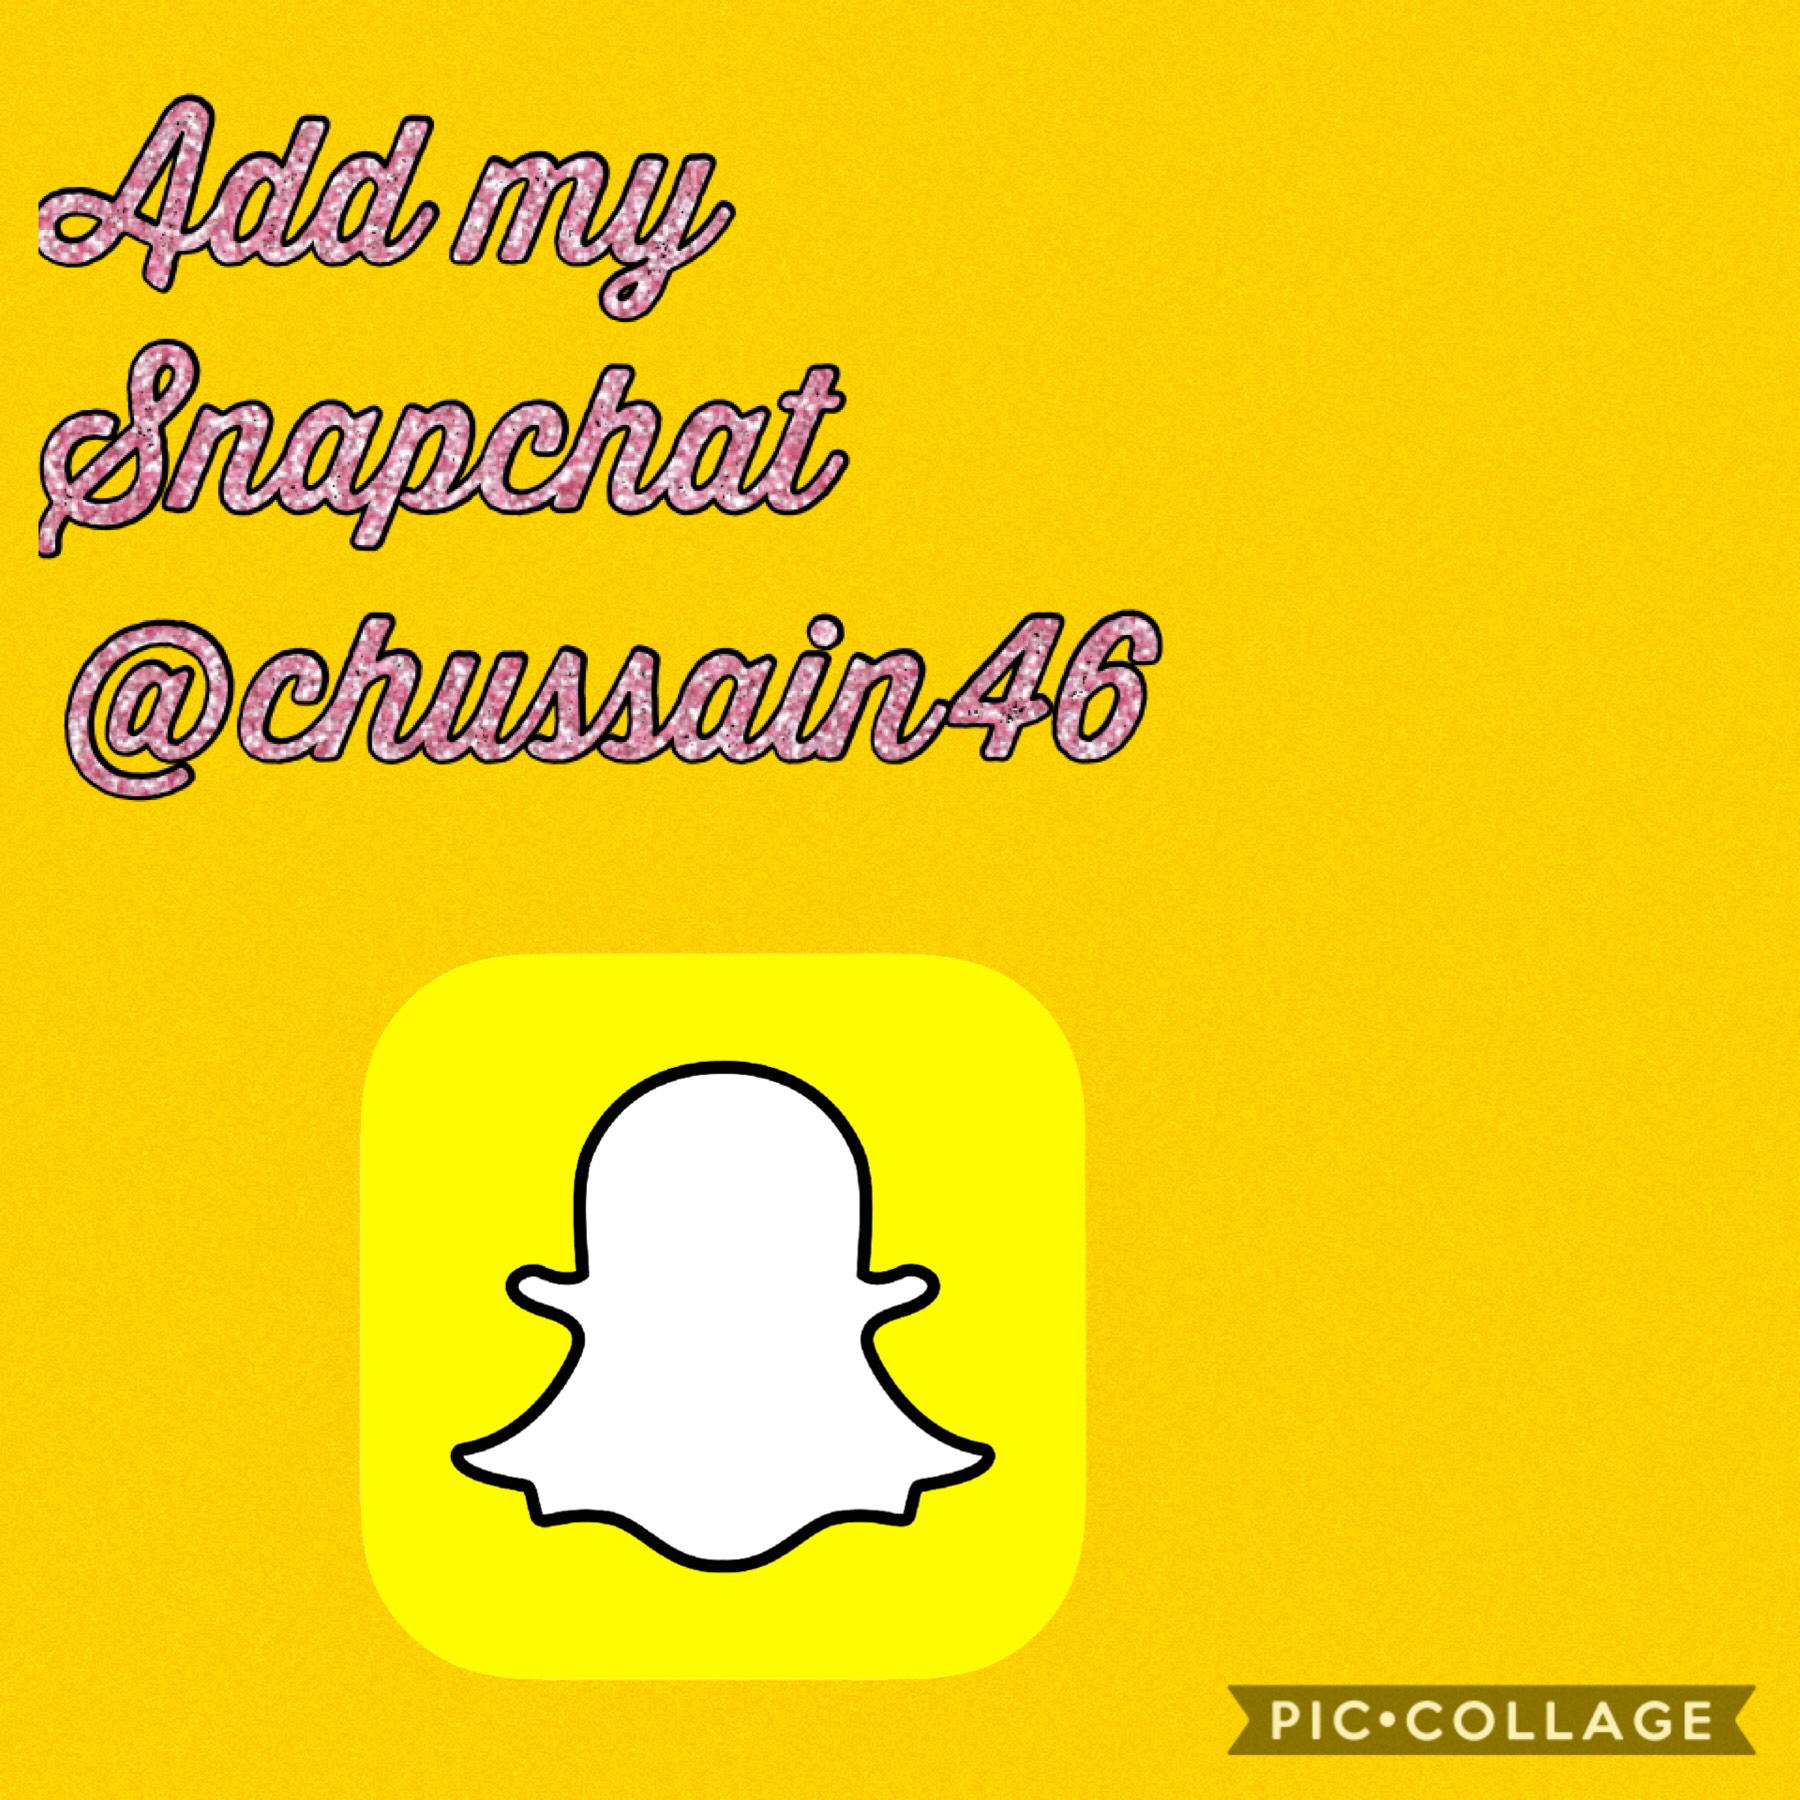 Add me up 😊😊😊